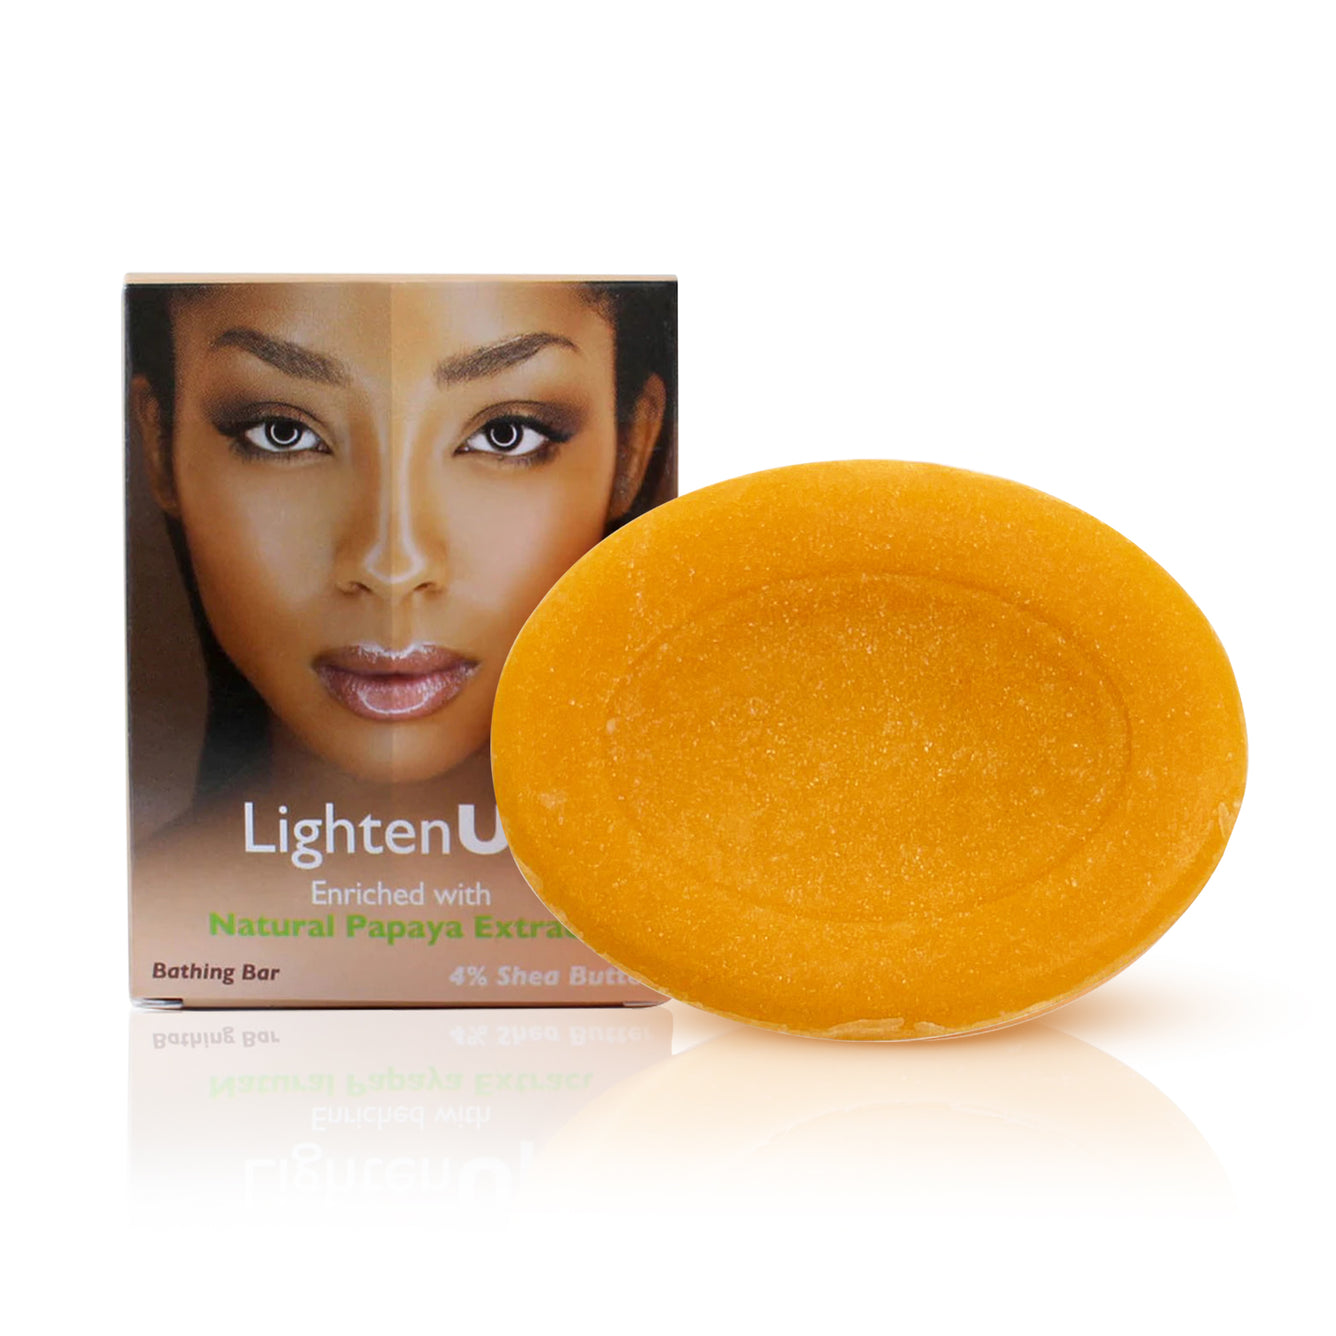 Omic LightenUp PLUS Natural Papaya Bathing Bar with Shea Butter LightenUp - Mitchell Brands - Skin Lightening, Skin Brightening, Fade Dark Spots, Shea Butter, Hair Growth Products